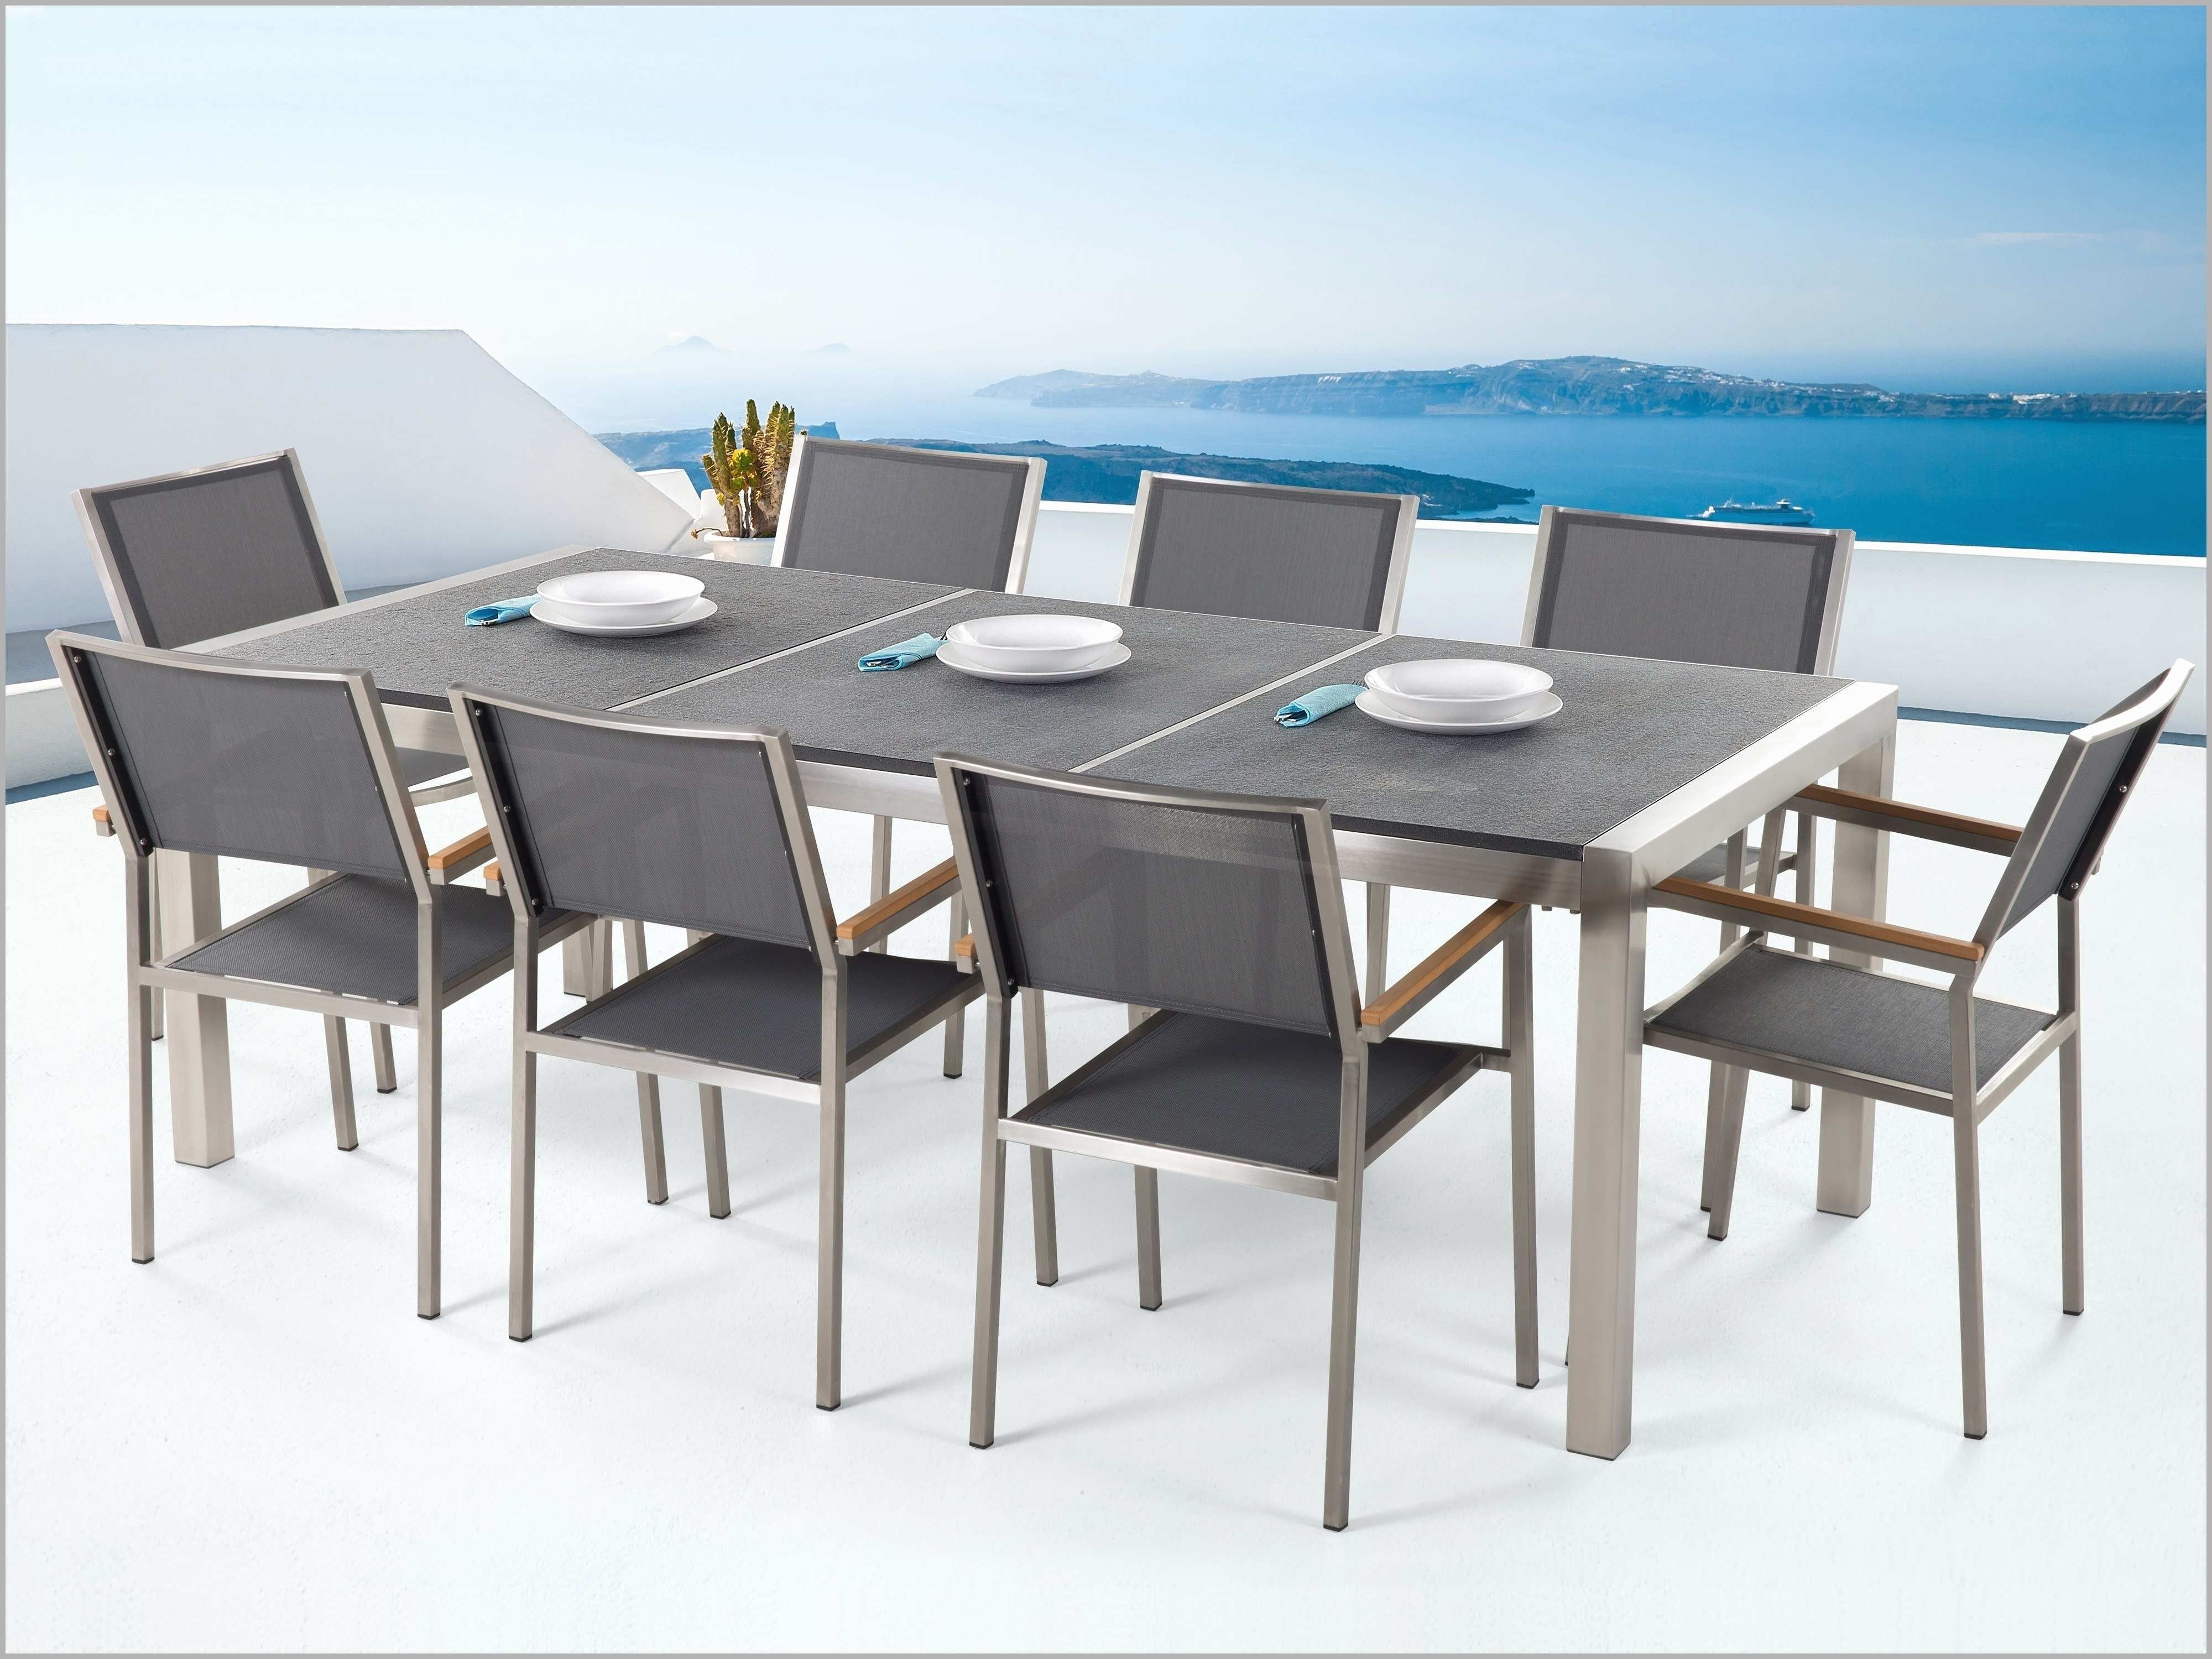 Cheap Dining Table Sets Near Me Lovely Black Granite Top Dining With Well Known Cheap Dining Tables (View 15 of 25)